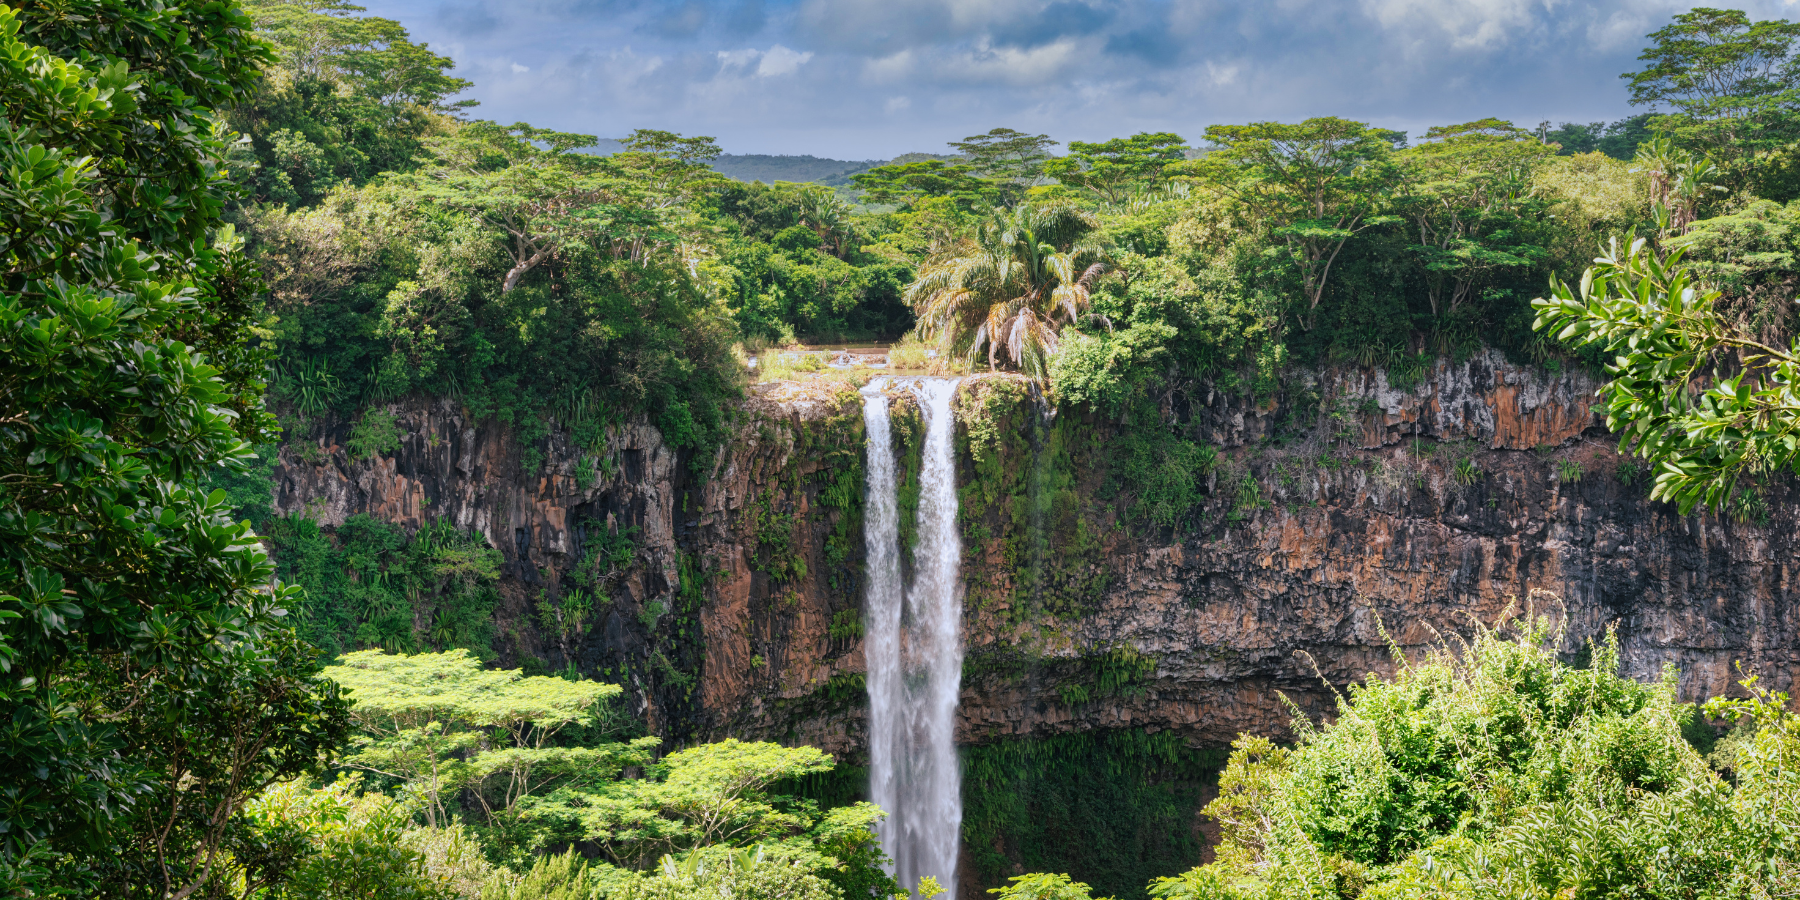 A waterfall spills over a cliff edge, surrounded by lush rainforest with a blue sky above